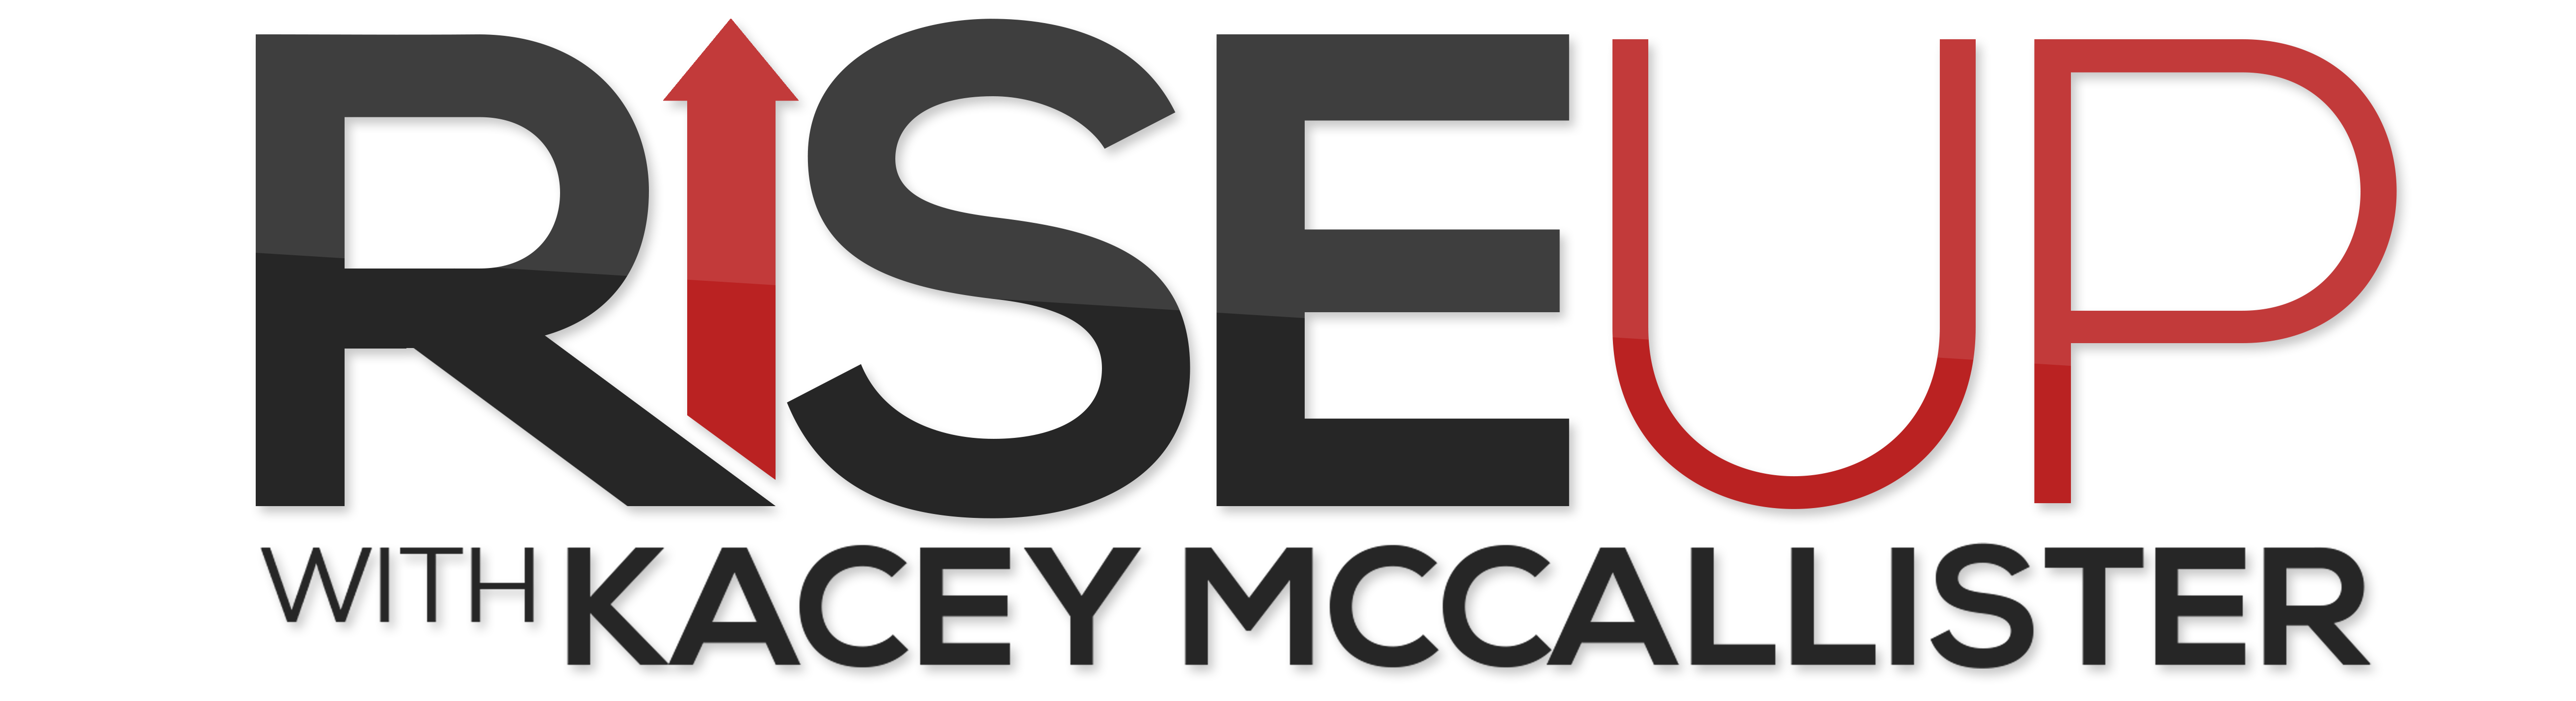 RISE UP with Kacey McCallister